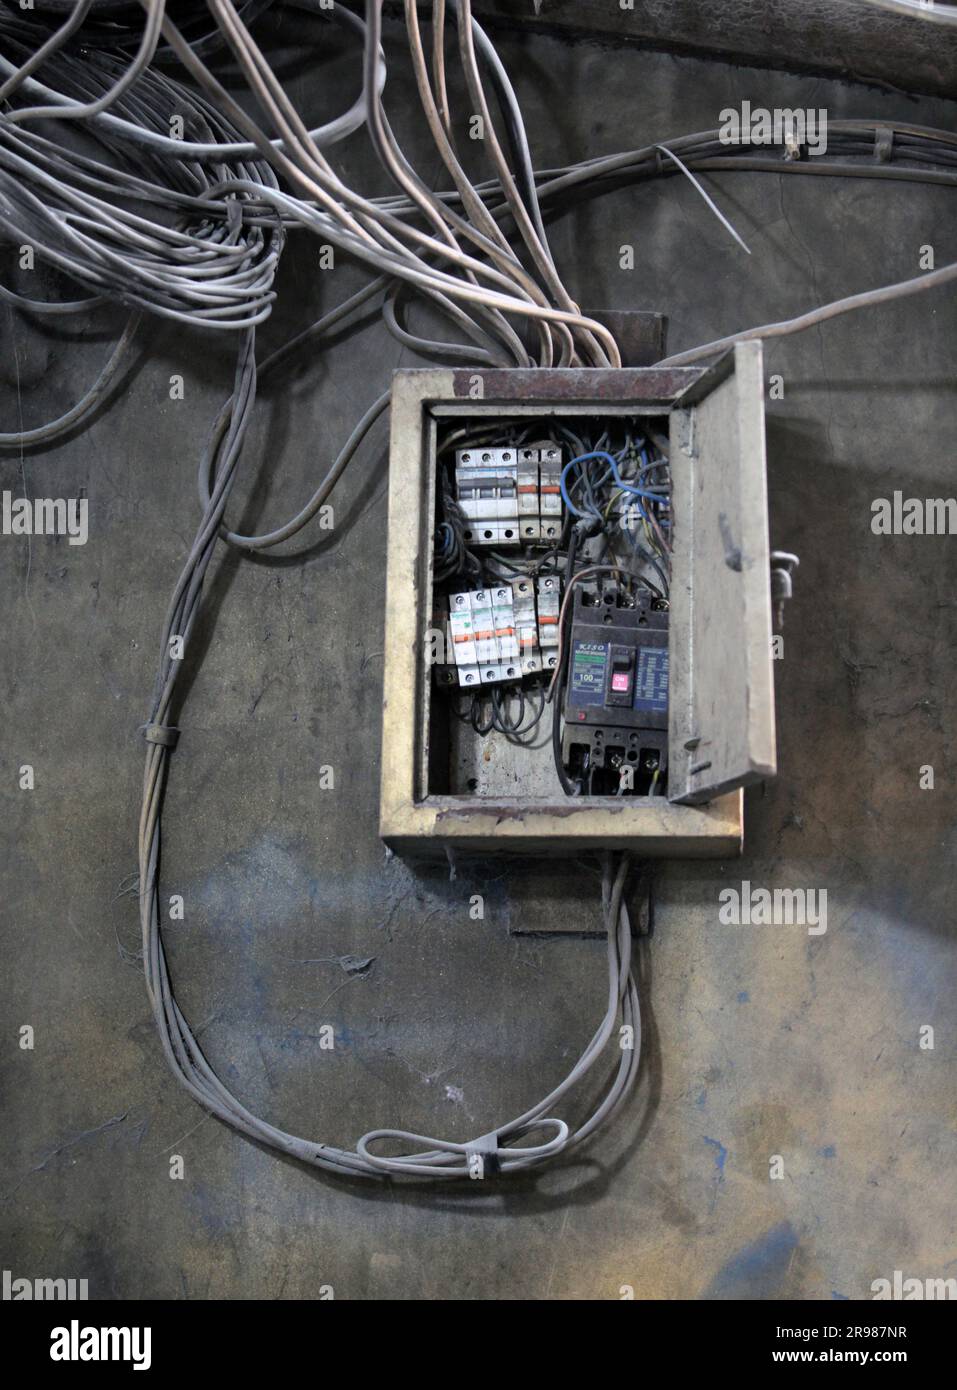 Dangerous mcb cable connection. messy power cable connections. Stock Photo